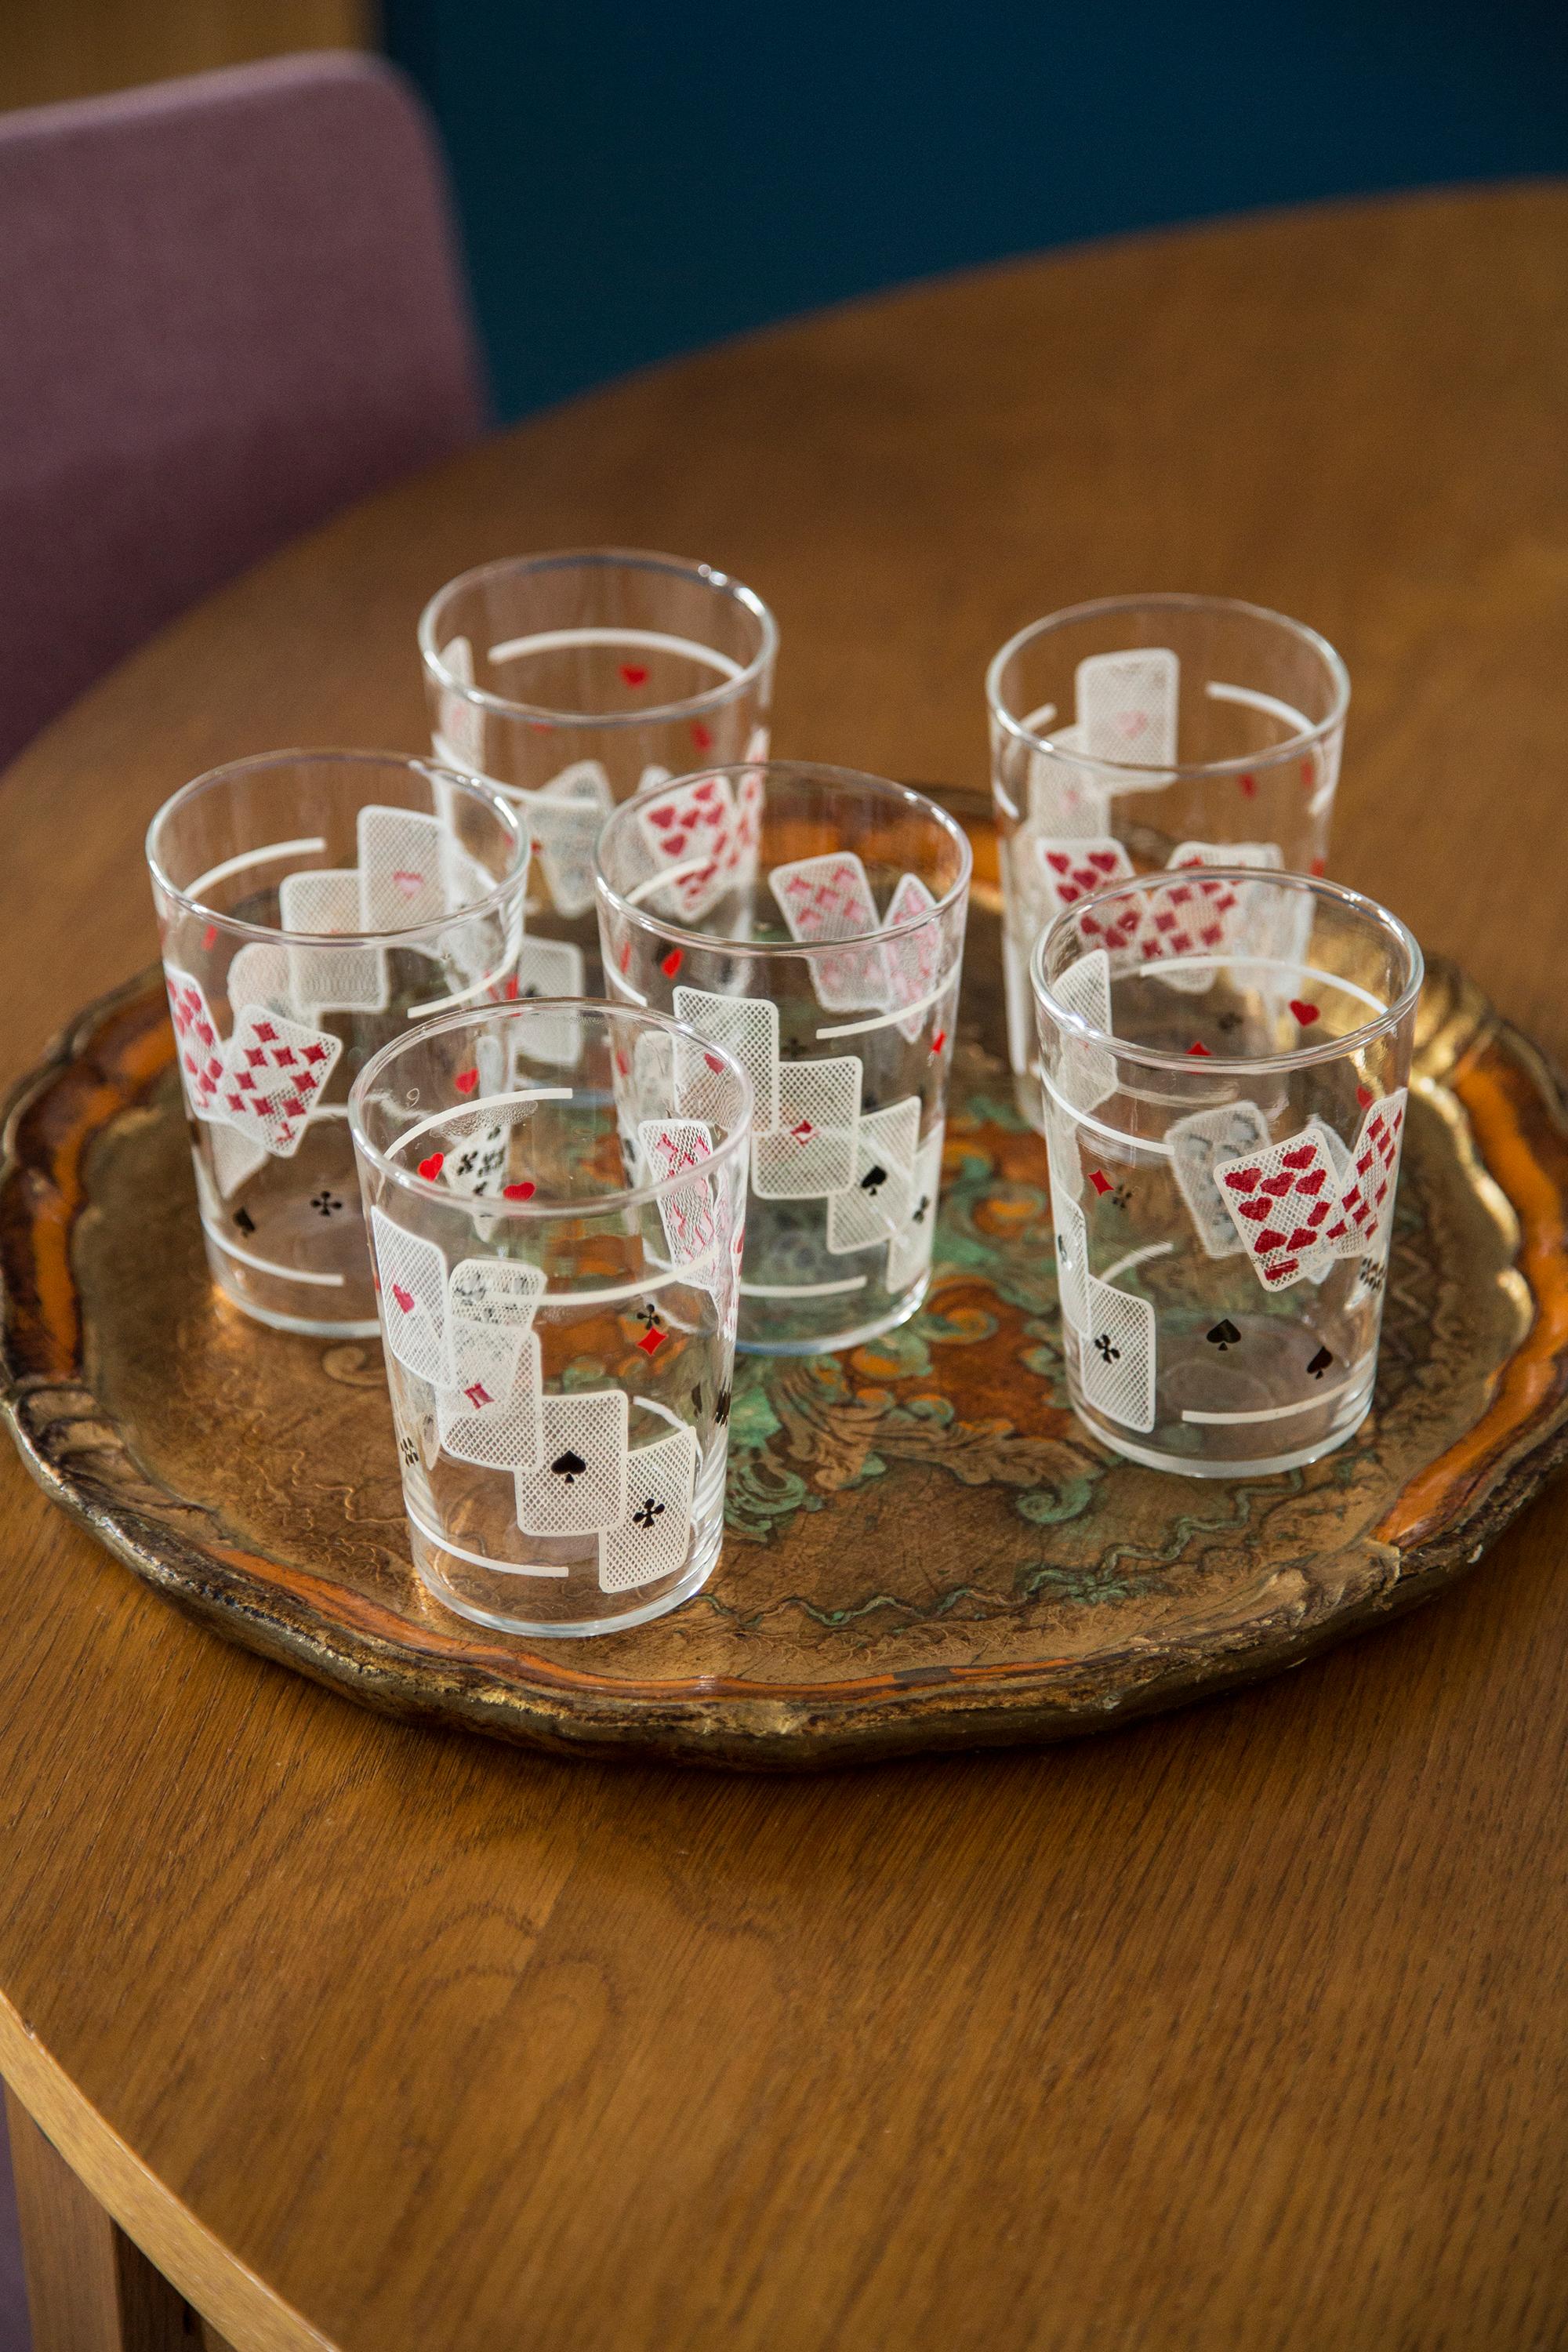 A stunning set of card painted glasses with geometric design, made by one of the many glass manufacturers based in the region of Empoli, Italy. Would make a great addition to any collection! Very good original vintage condition. Only one unique set.